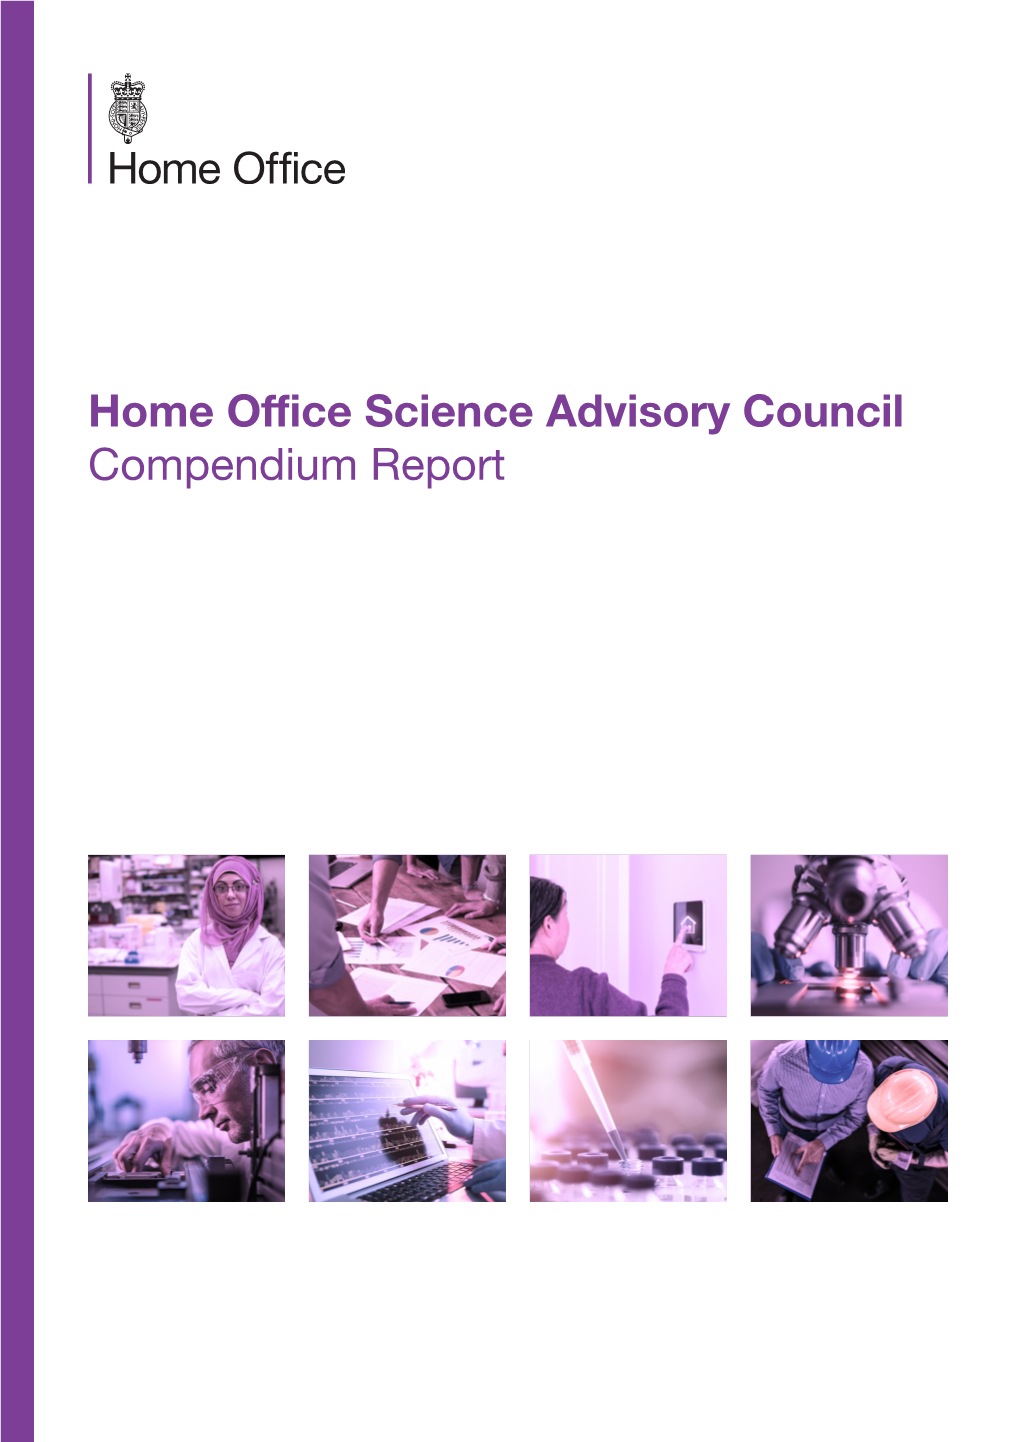 Home Office Science Advisory Council Compendium Report